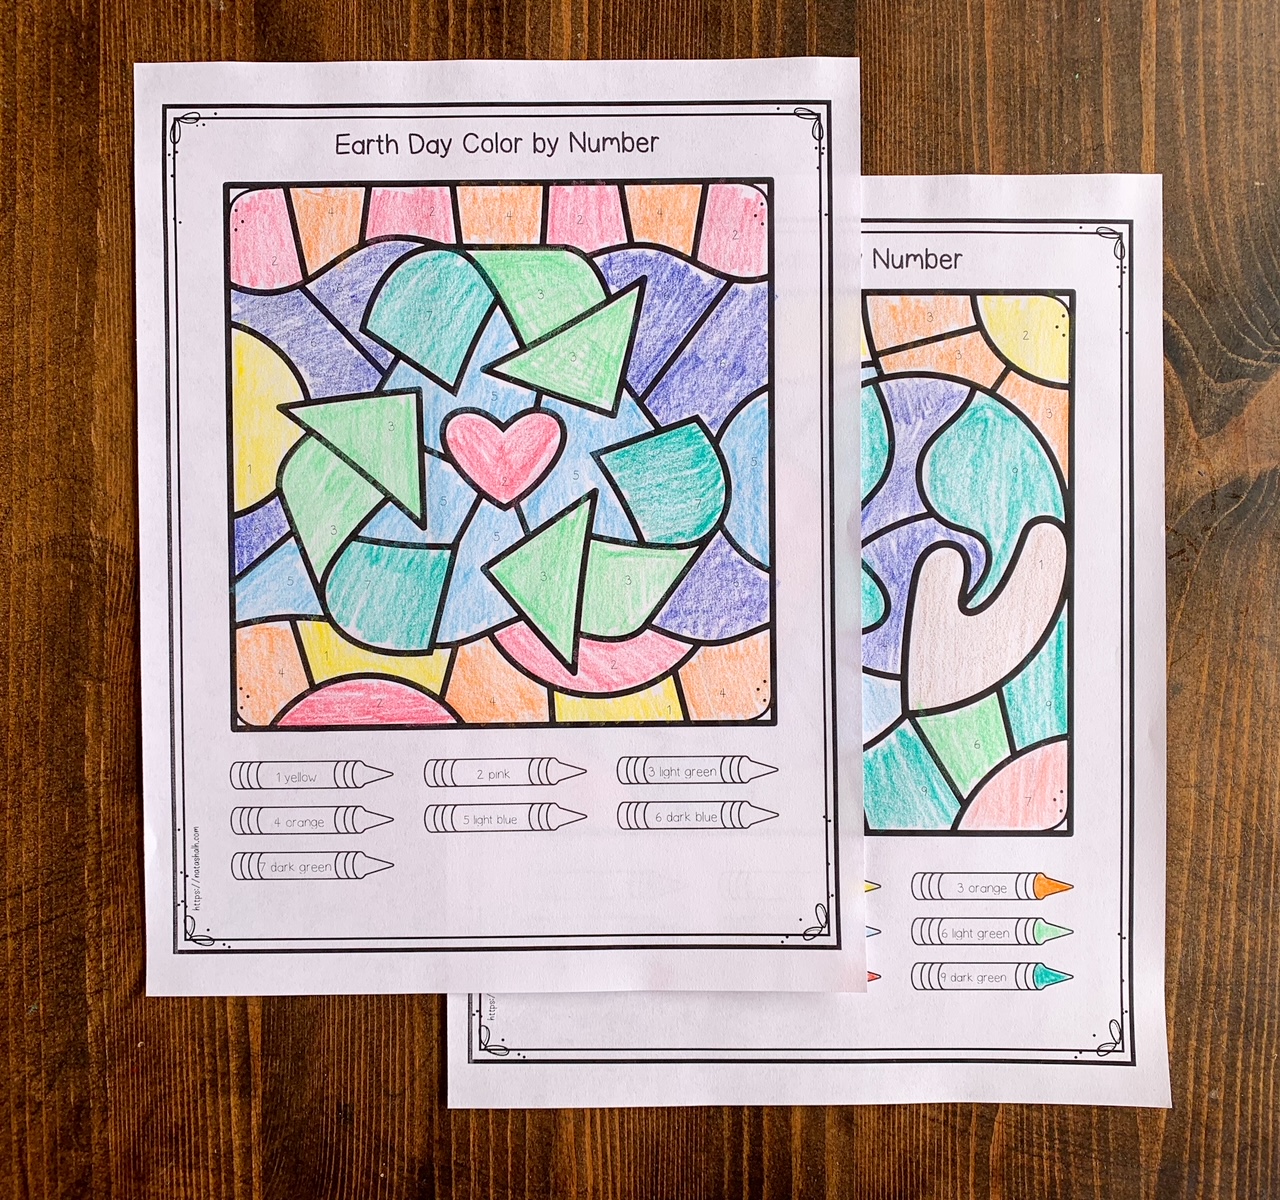 A photograph of two color by number worksheets with an Earth Day theme. One has hands holding a globe and the other has a recycle symbol 